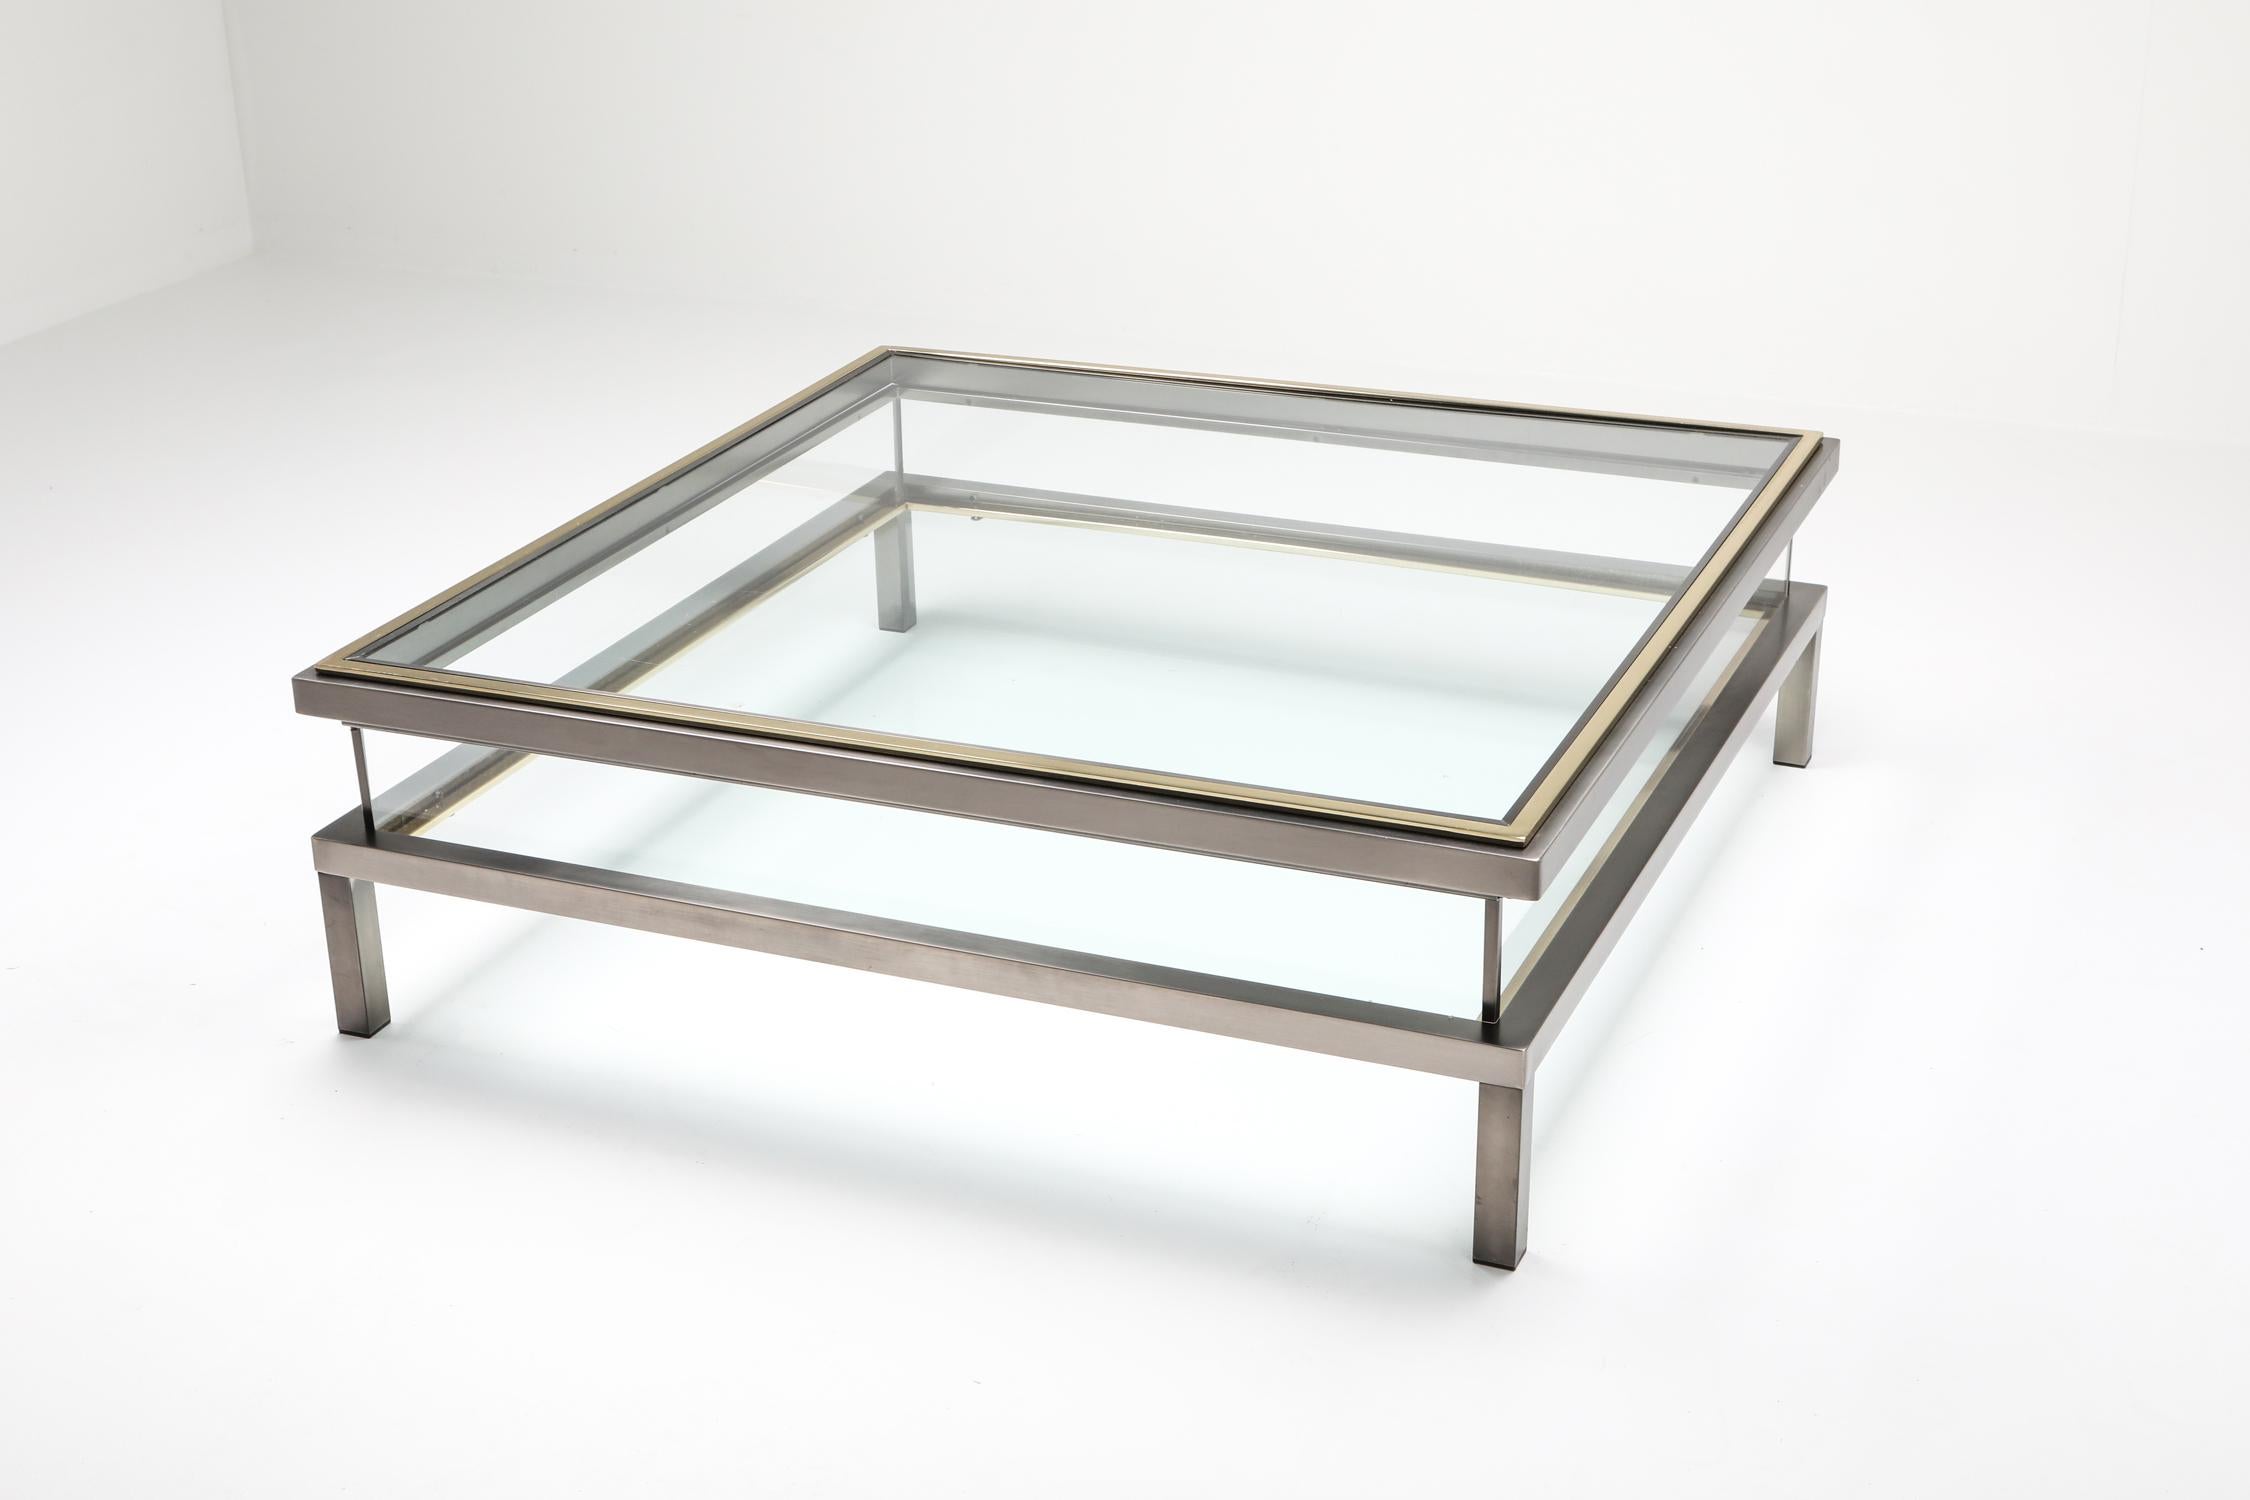 Sliding coffee table, Maison Jansen, France, 1970s

The coffee table slides open which allows one to store magazine, glass work or anything you'd like in the middle compartment.
Chromed steel frame with a brass plated top edge.
Would fit well in